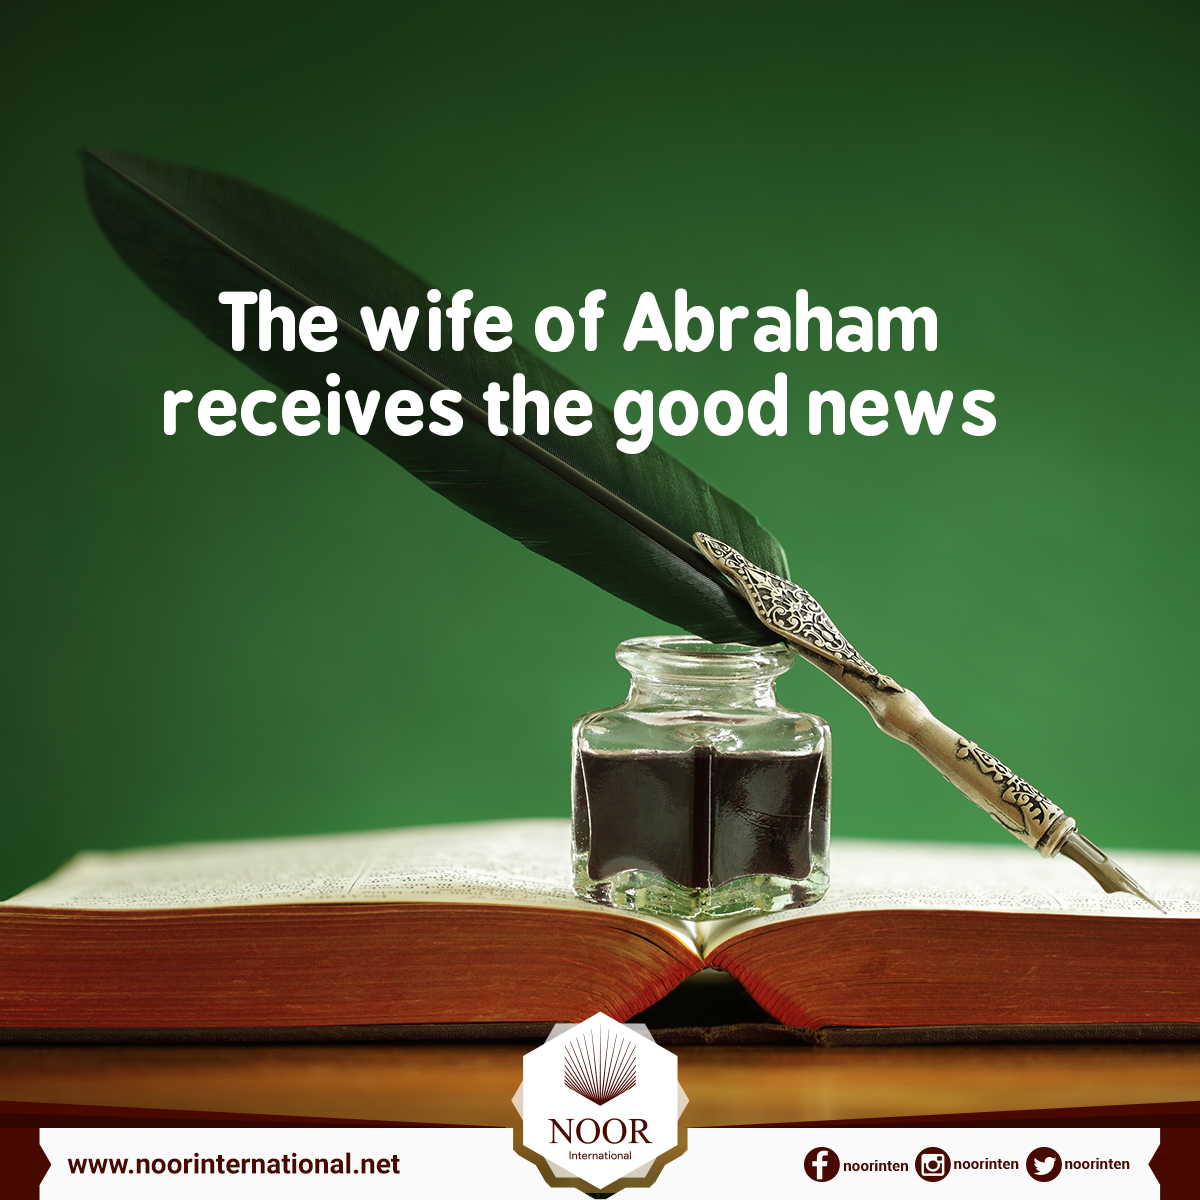 The wife of Abraham receives the good news